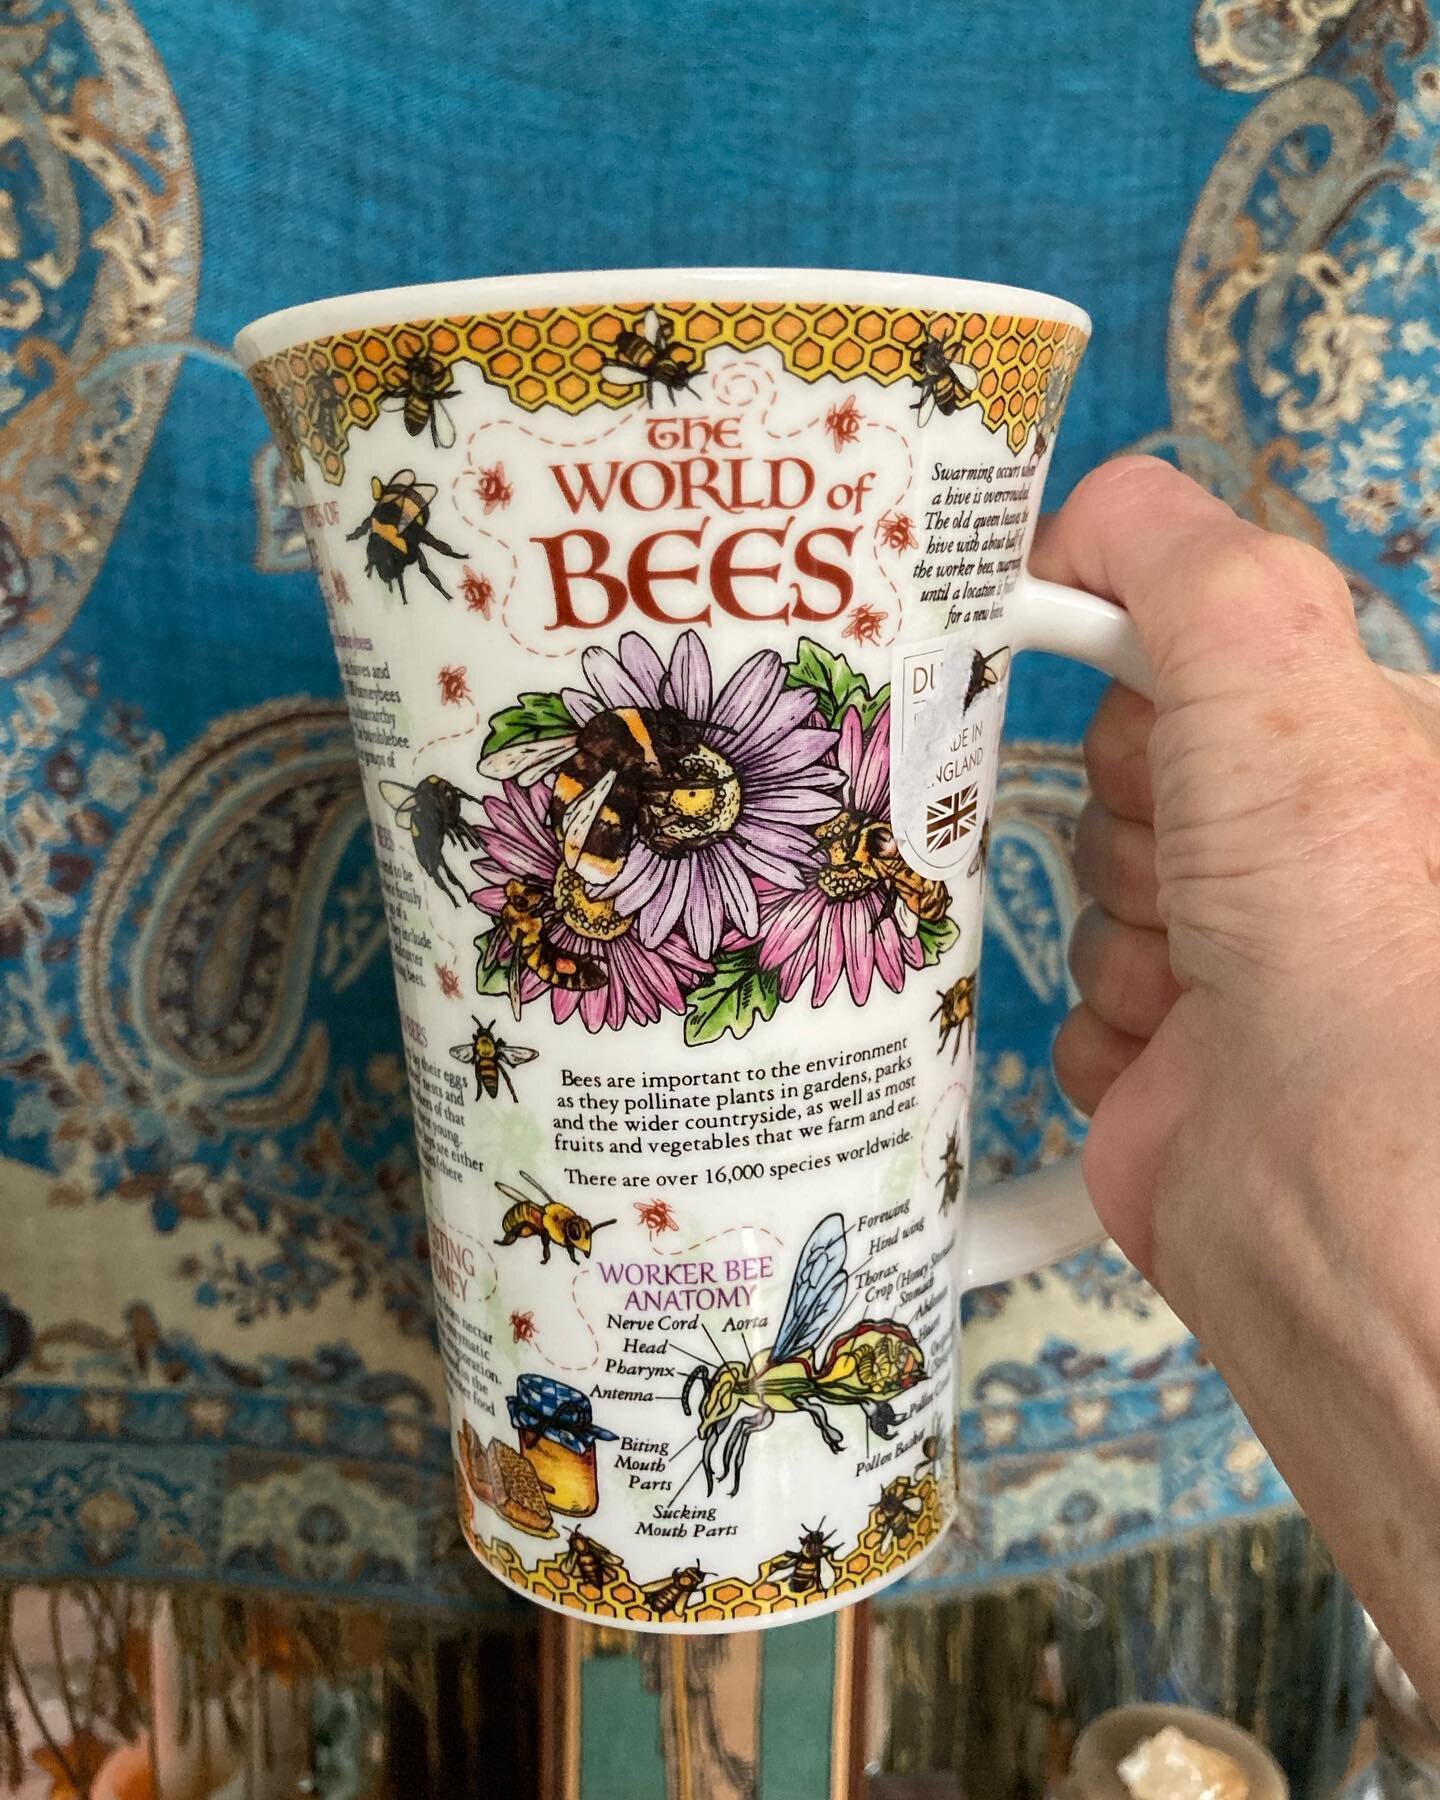 Kickstarter over and time to take a moment! My mom brought me this extra large teacup (she knows me) and every centimeter is filled with info! Inside it identifies bees.  The handle/ how to start a bee garden! I love it. 

#Keeperofthesacredbee  #sac